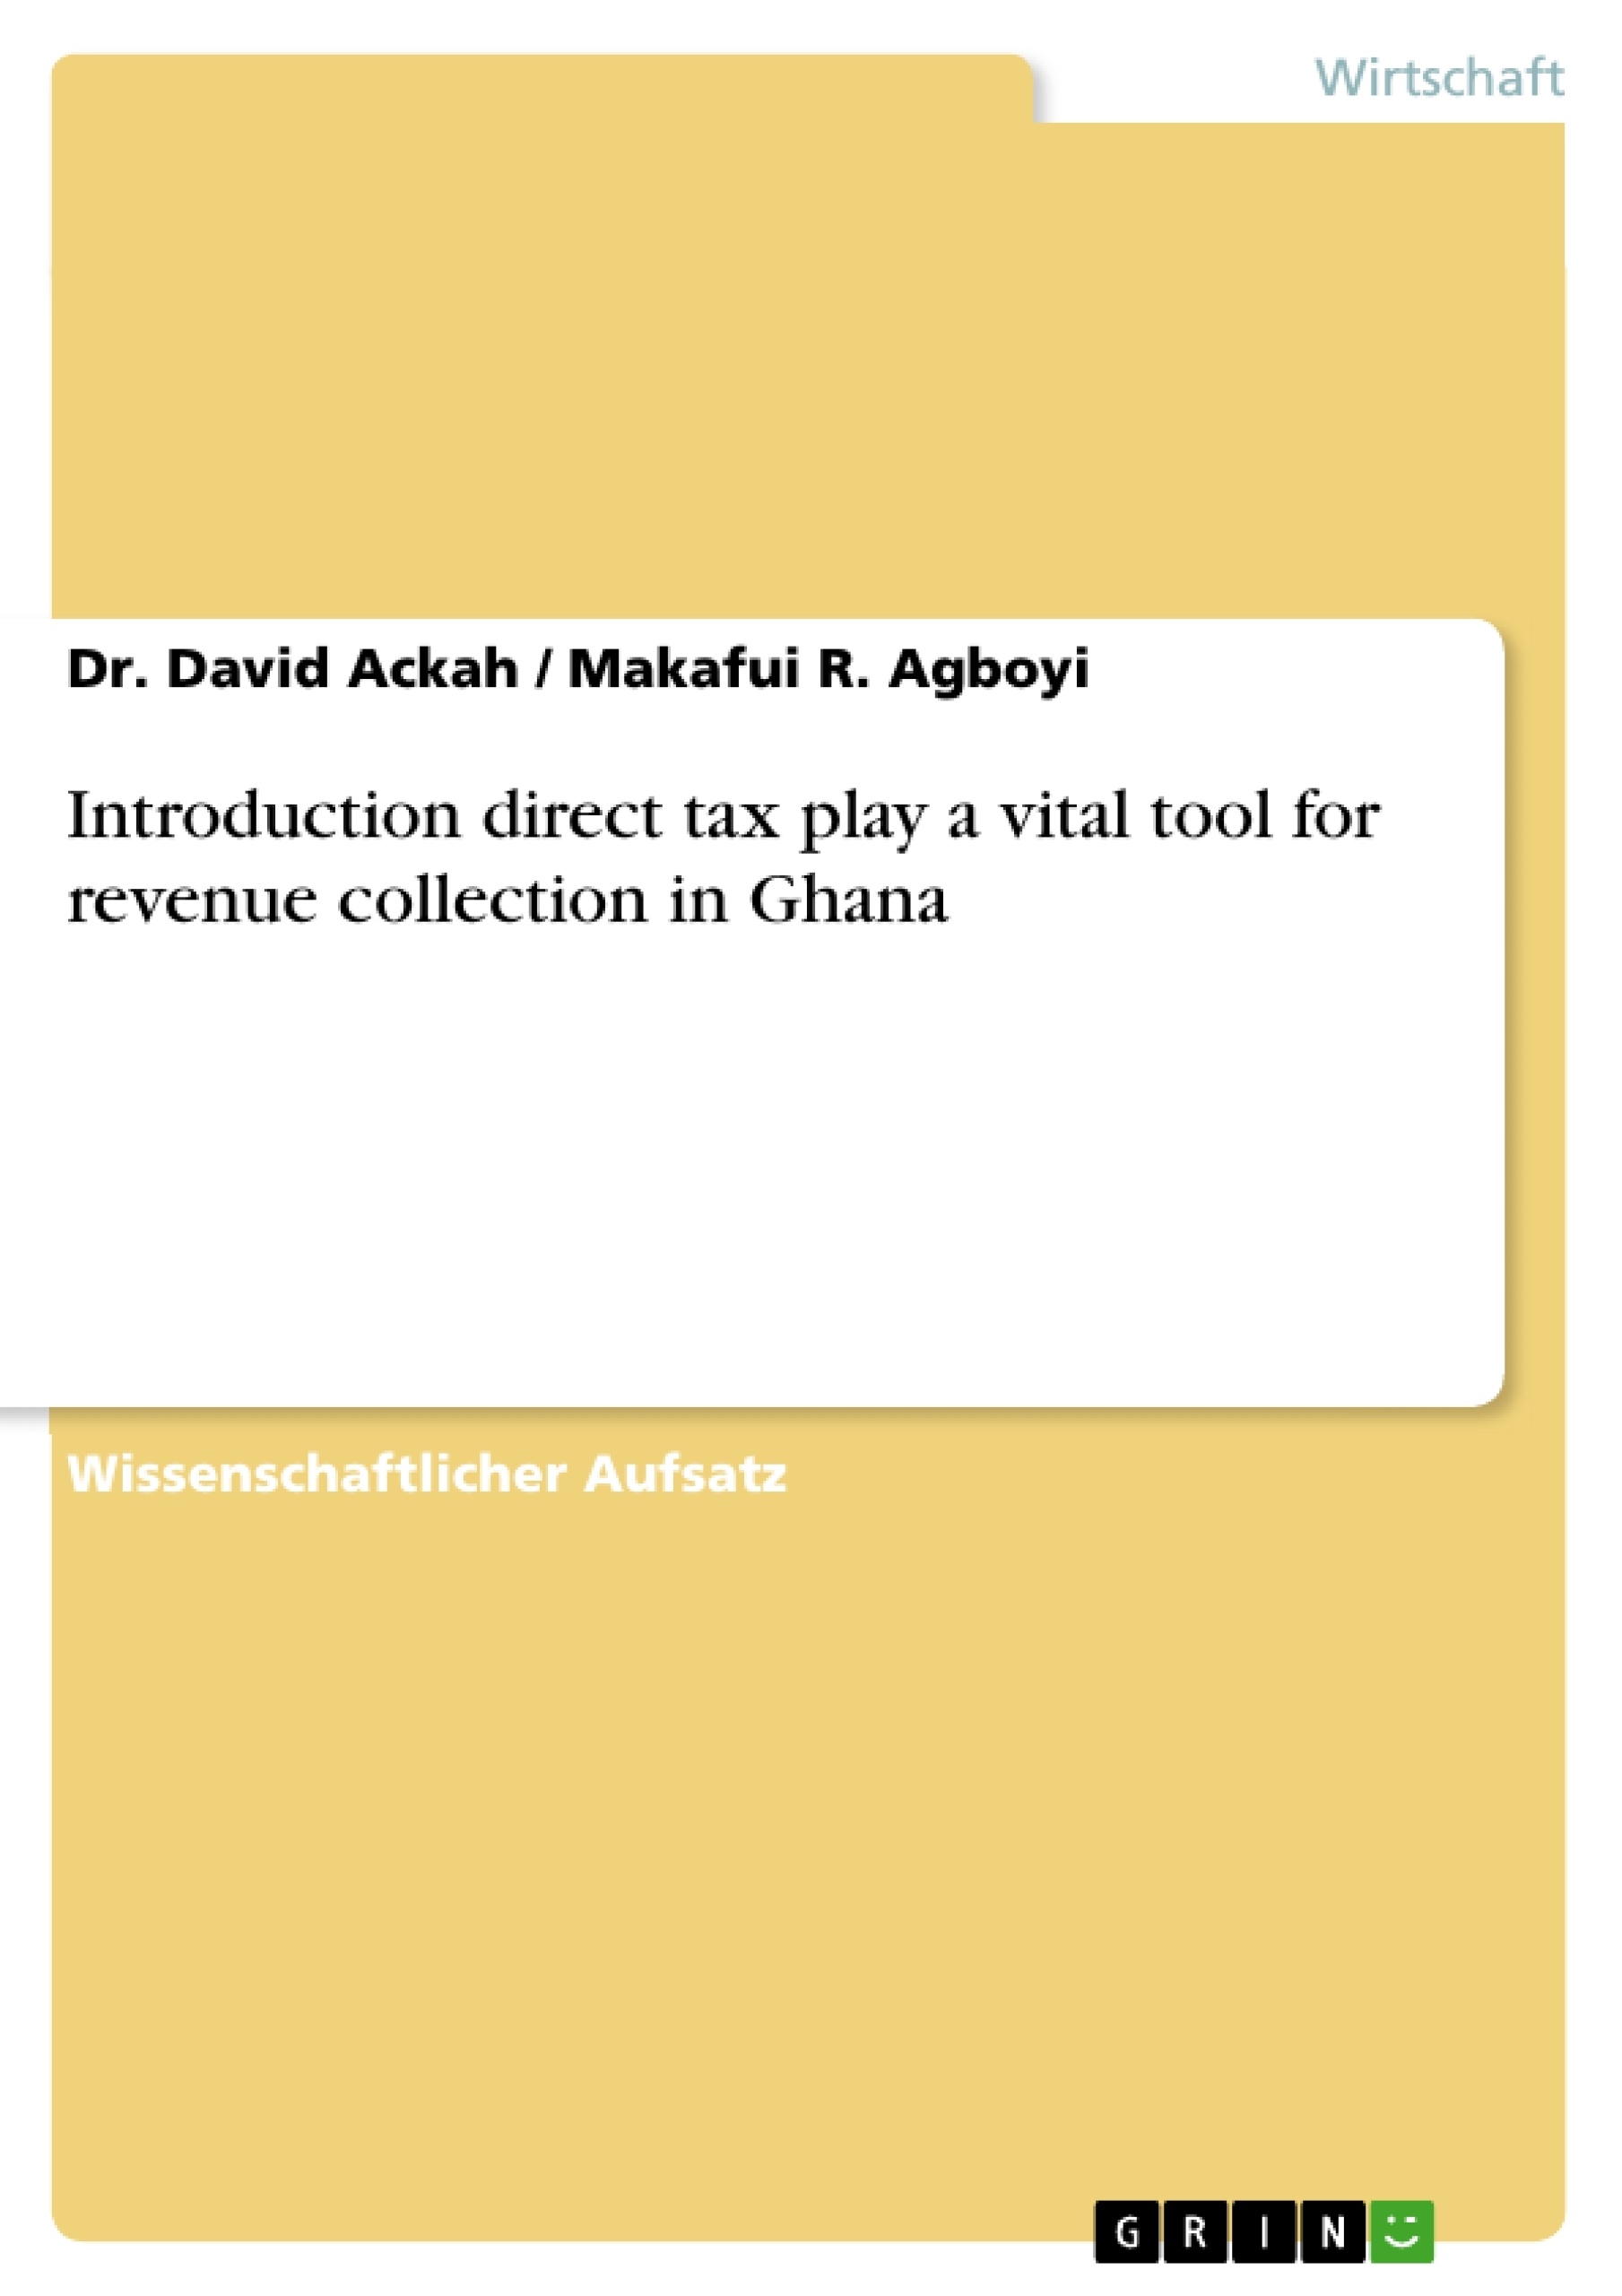 Titel: Introduction direct tax play a vital tool for revenue collection in Ghana